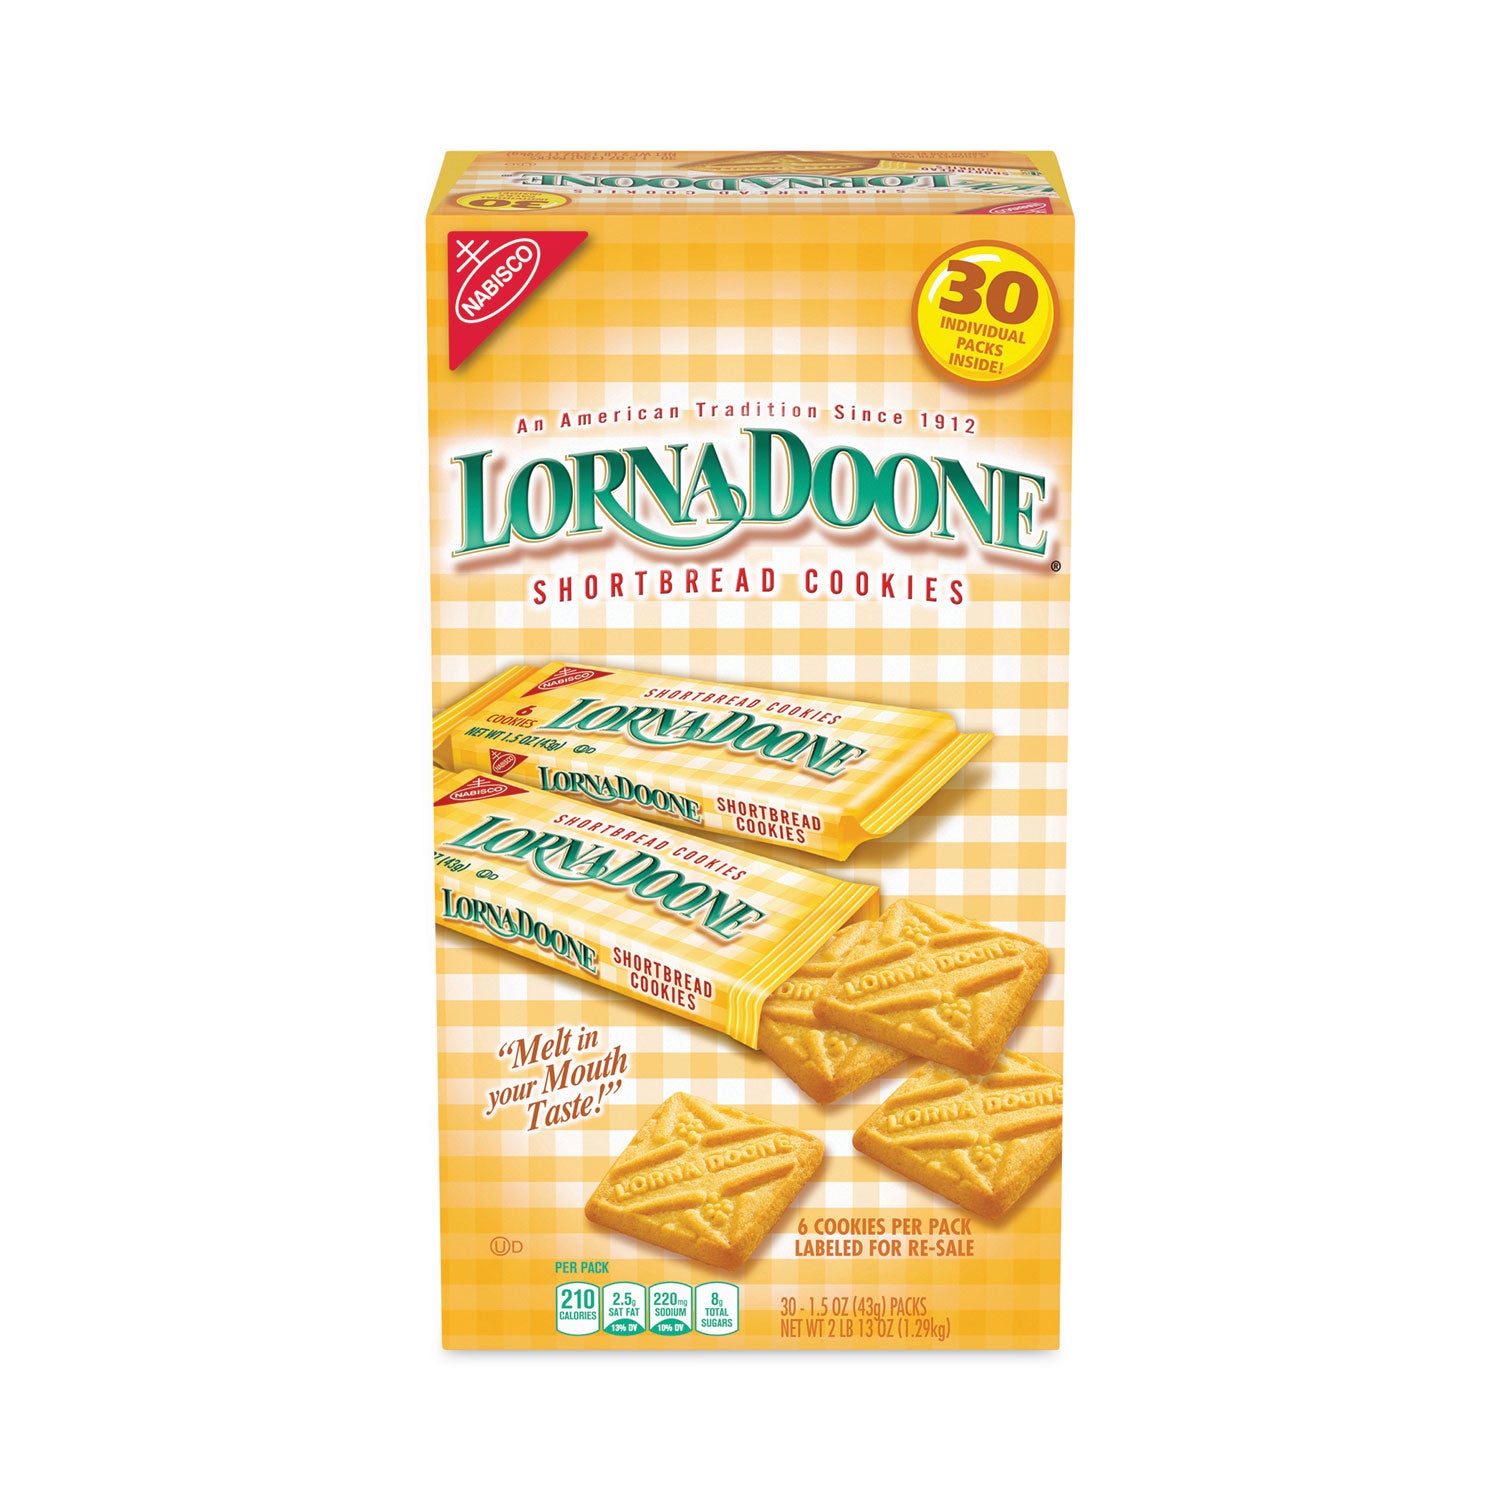 lorna-doone-shortbread-cookies-15-oz-packet-30-packets-carton-ships-in-1-3-business-days_grr22001042 - 2